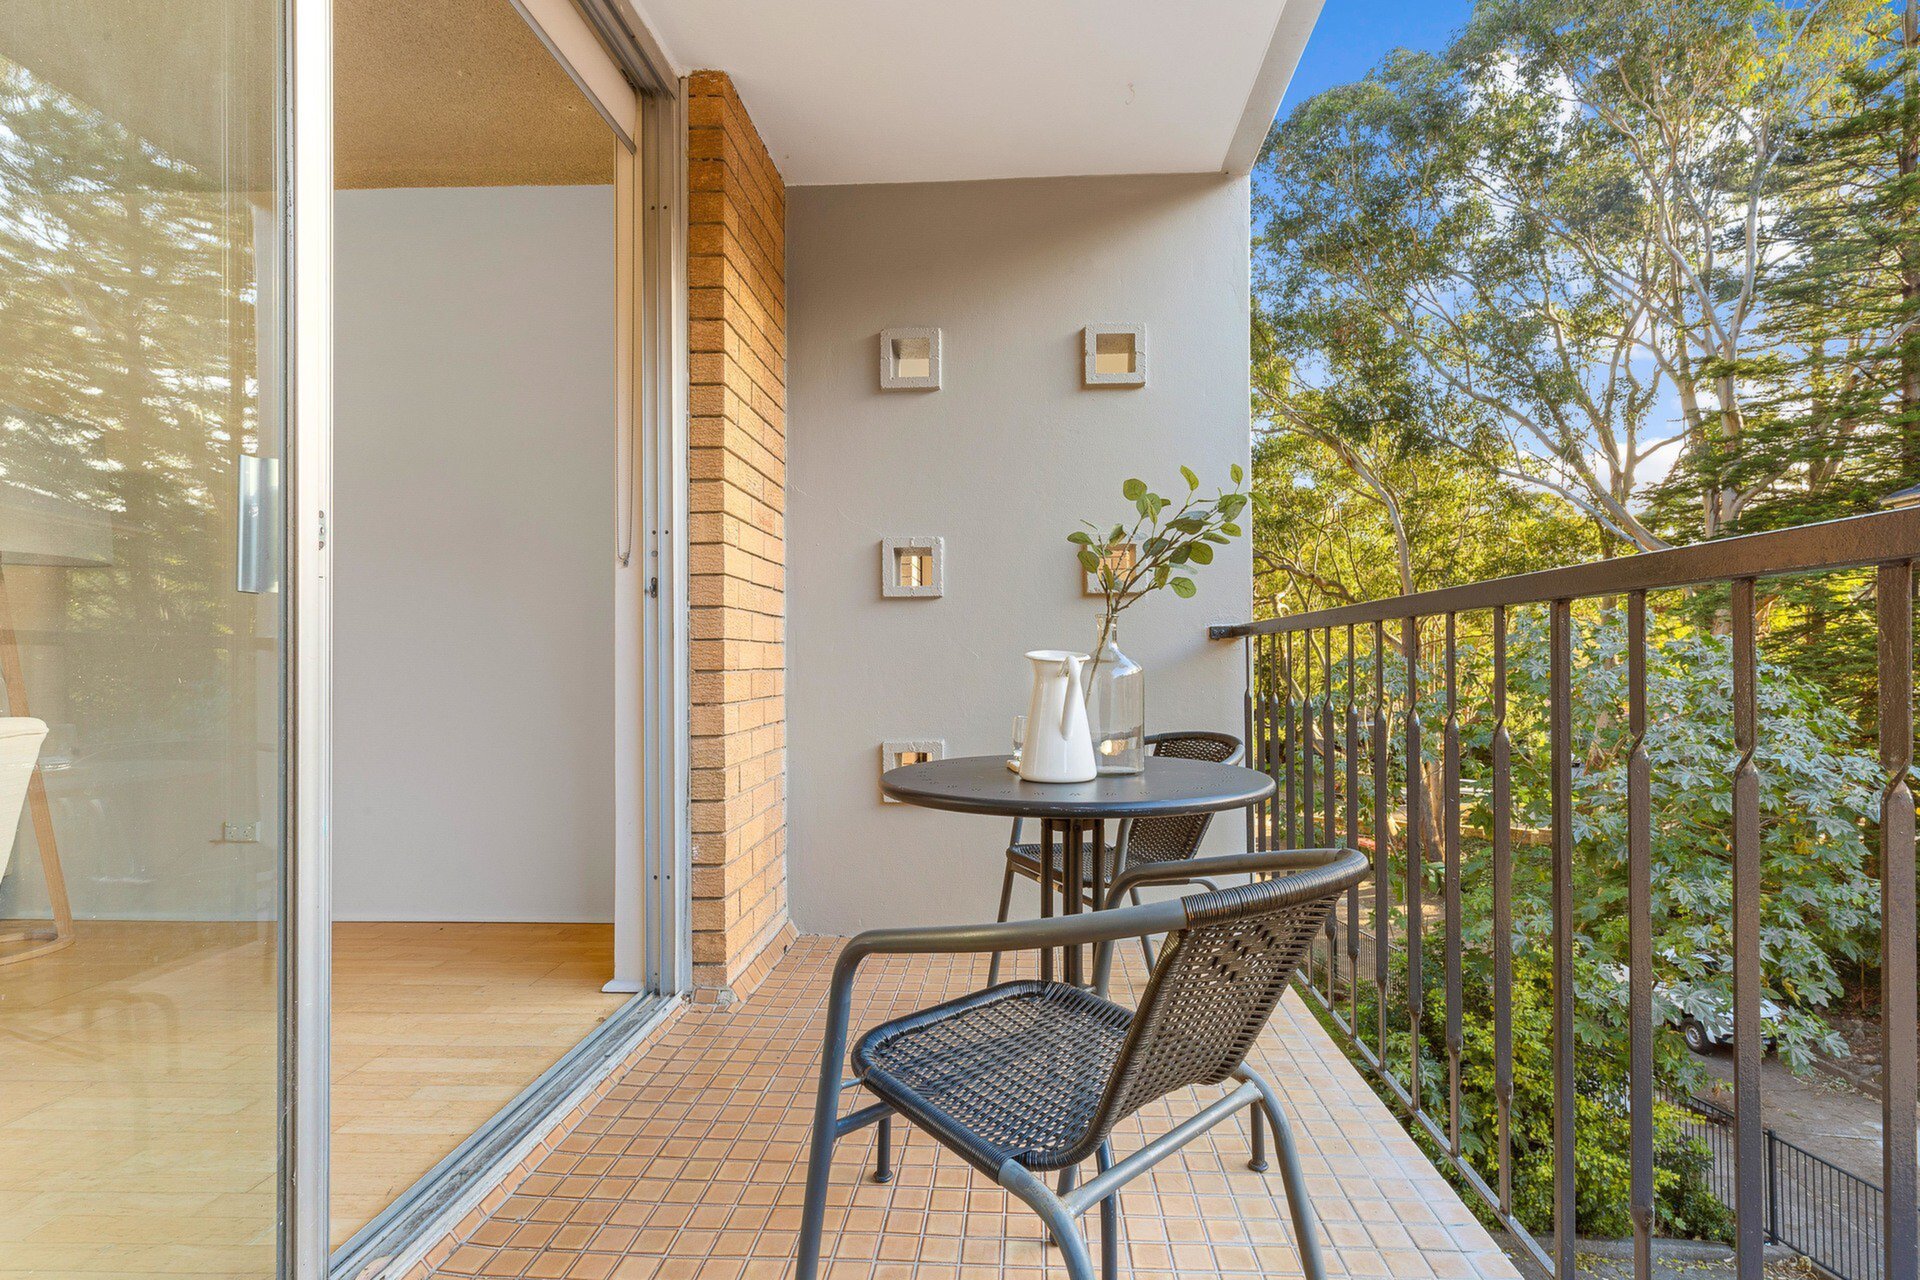 4/4 Stokes Street, Lane Cove Sold by Cassidy Real Estate - image 1